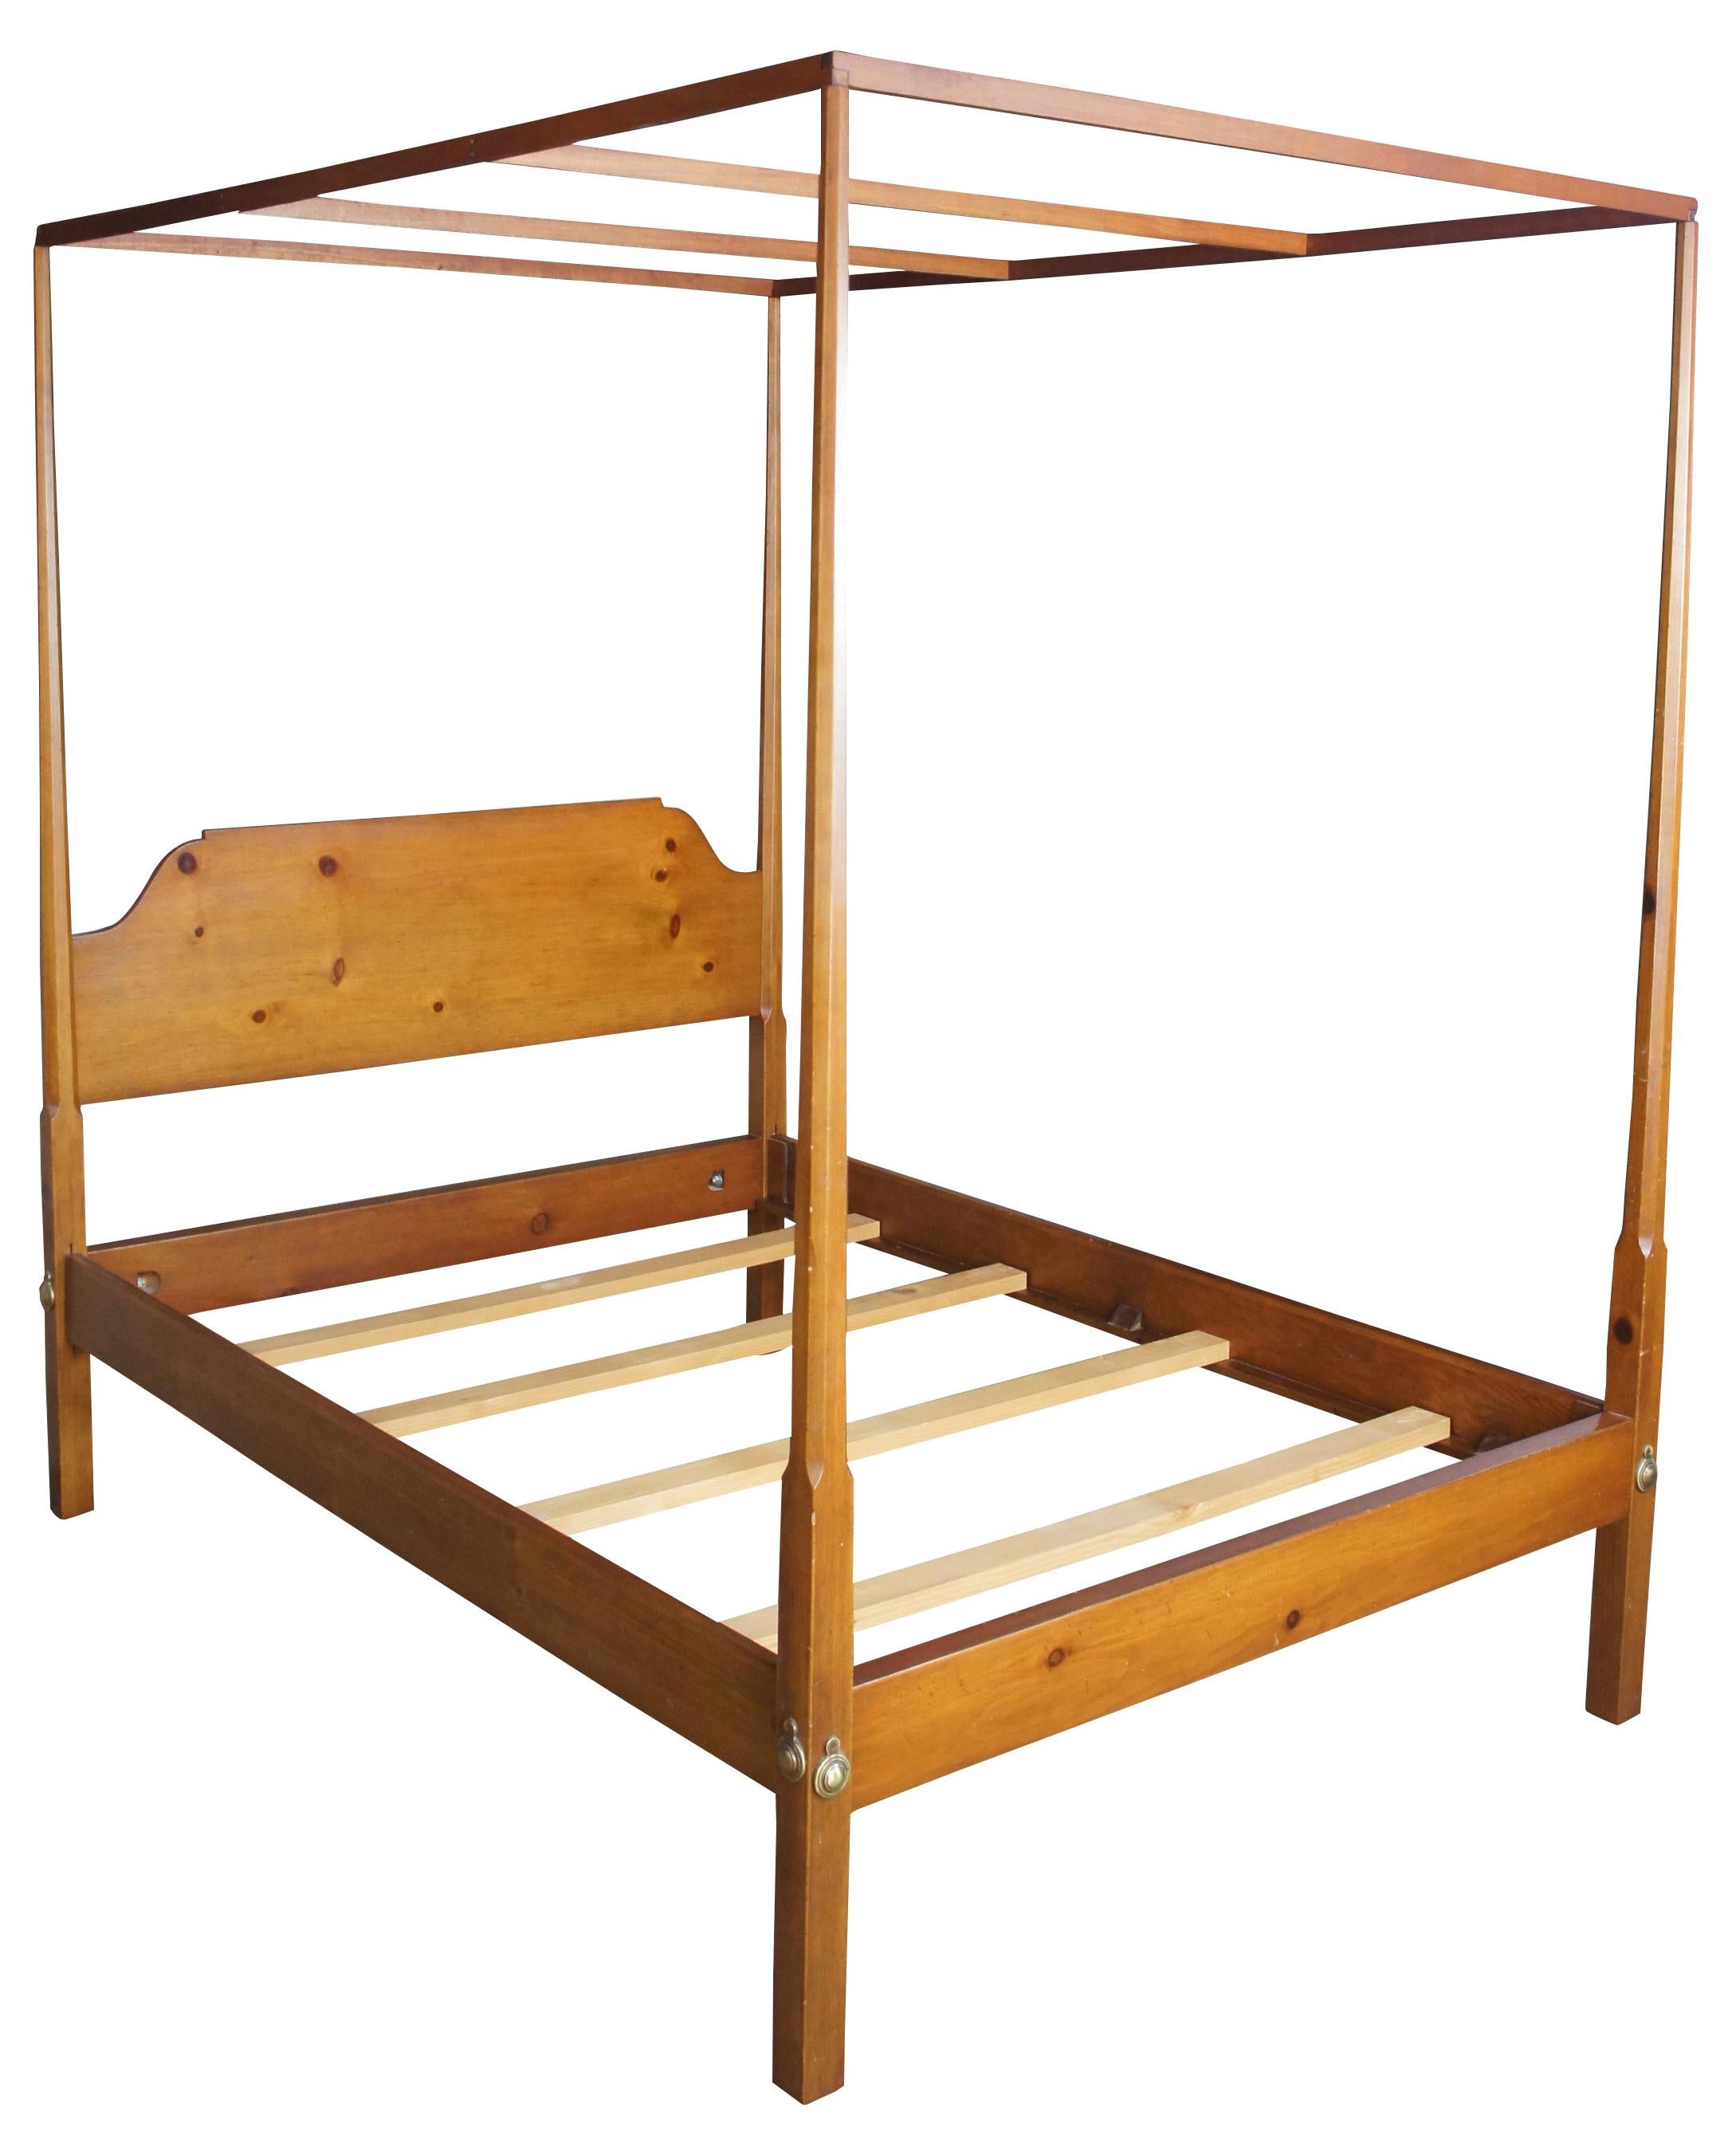 Early American pine full size pencil post canopy bed by David T Smith, circa 1987. A style popularized in the late 1700s. Features a covered canopy, pencil posts and colonial hardware.
  